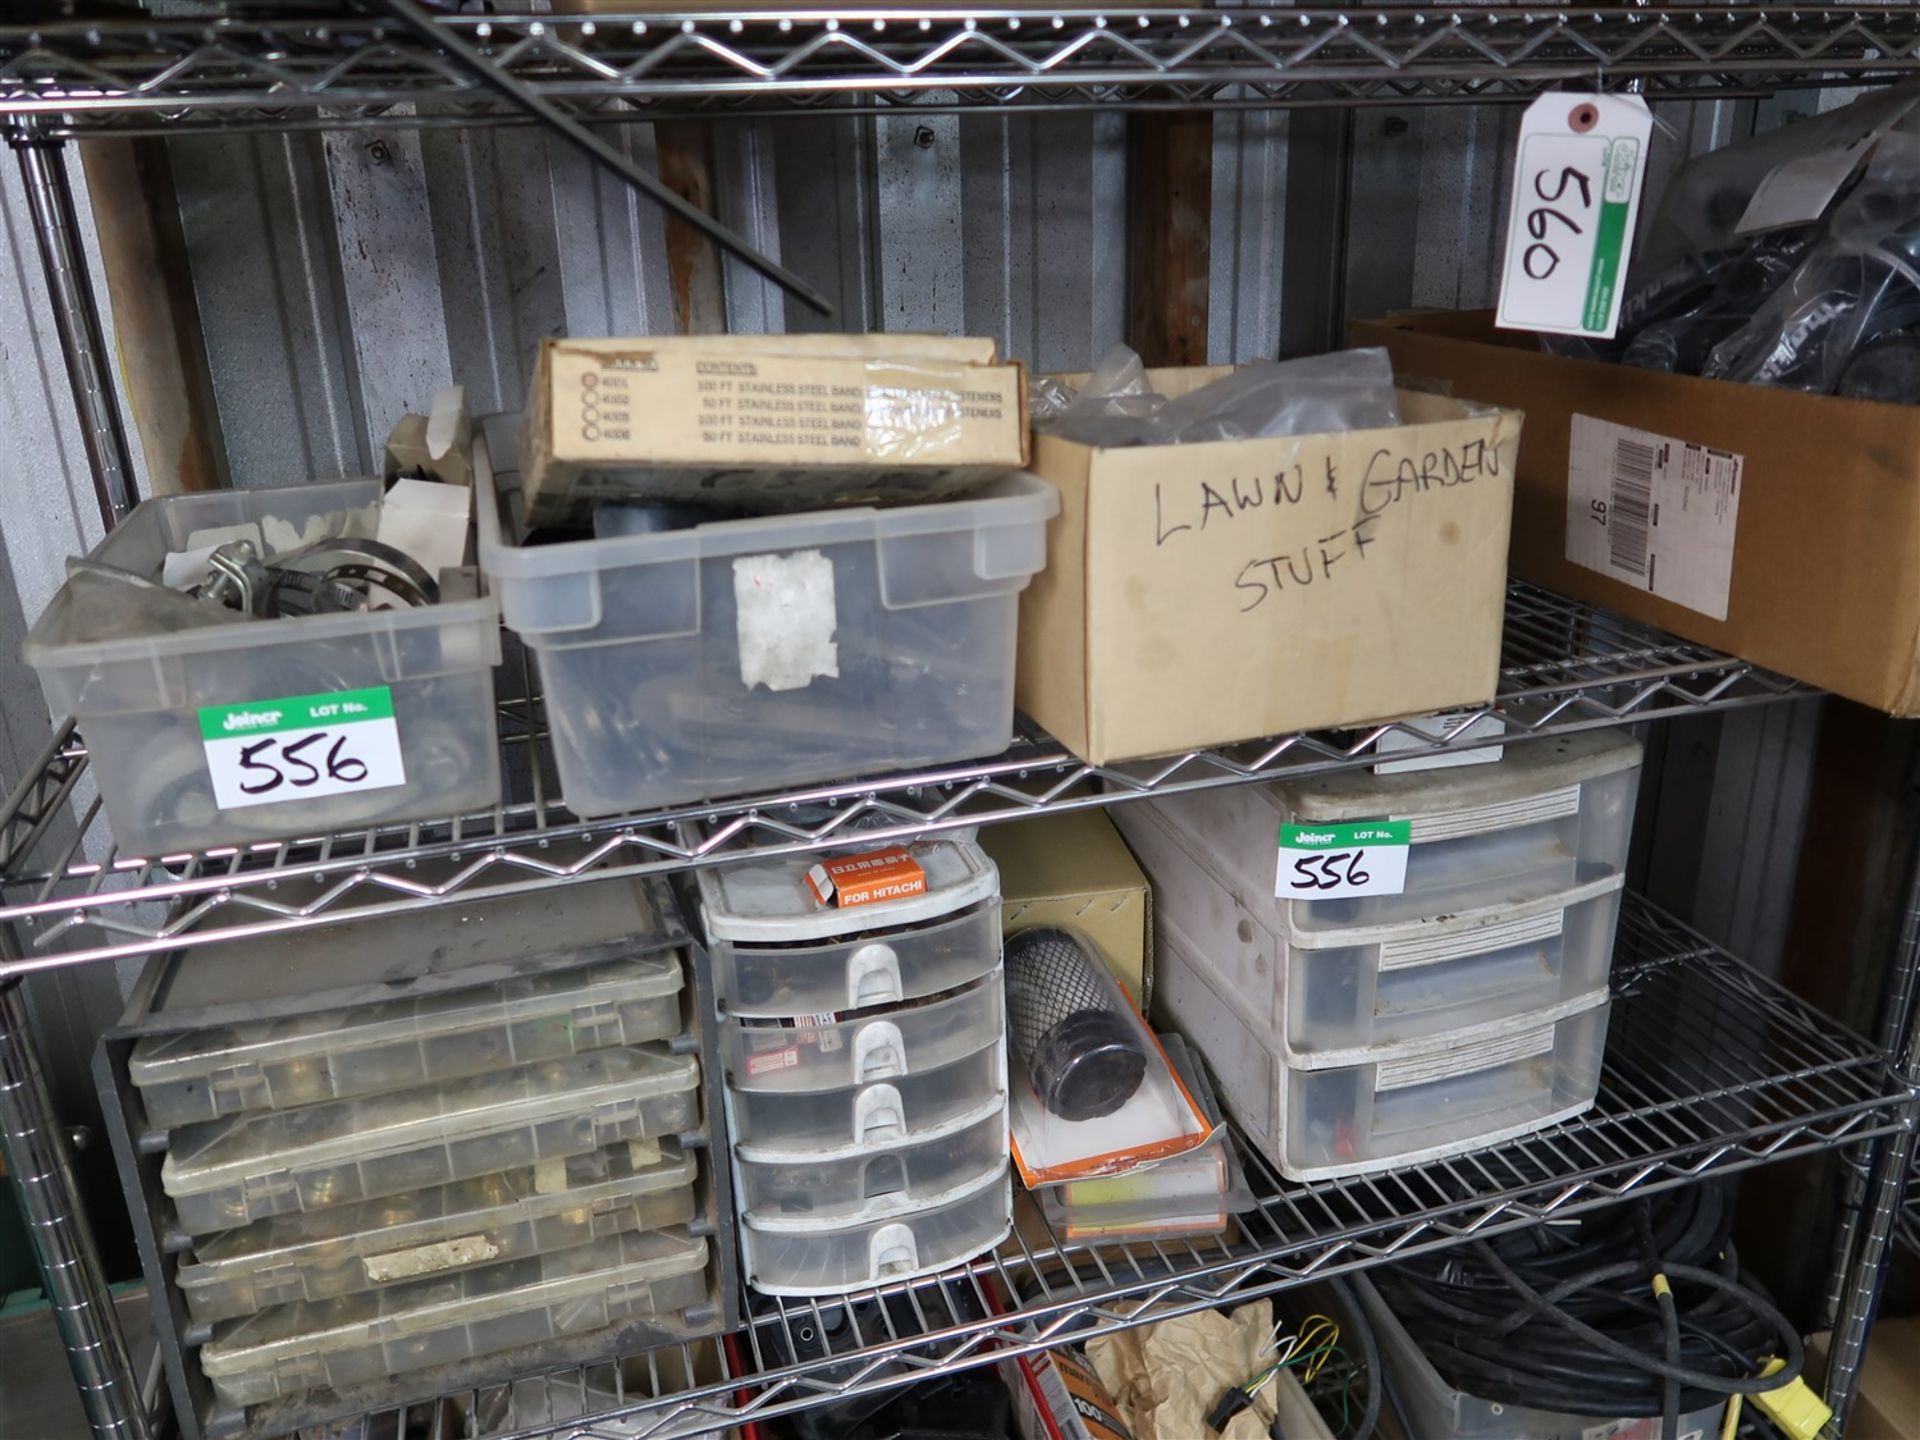 LOT OF ASSORTED TOOL PARTS, FITTINGS ETC. - Image 2 of 3